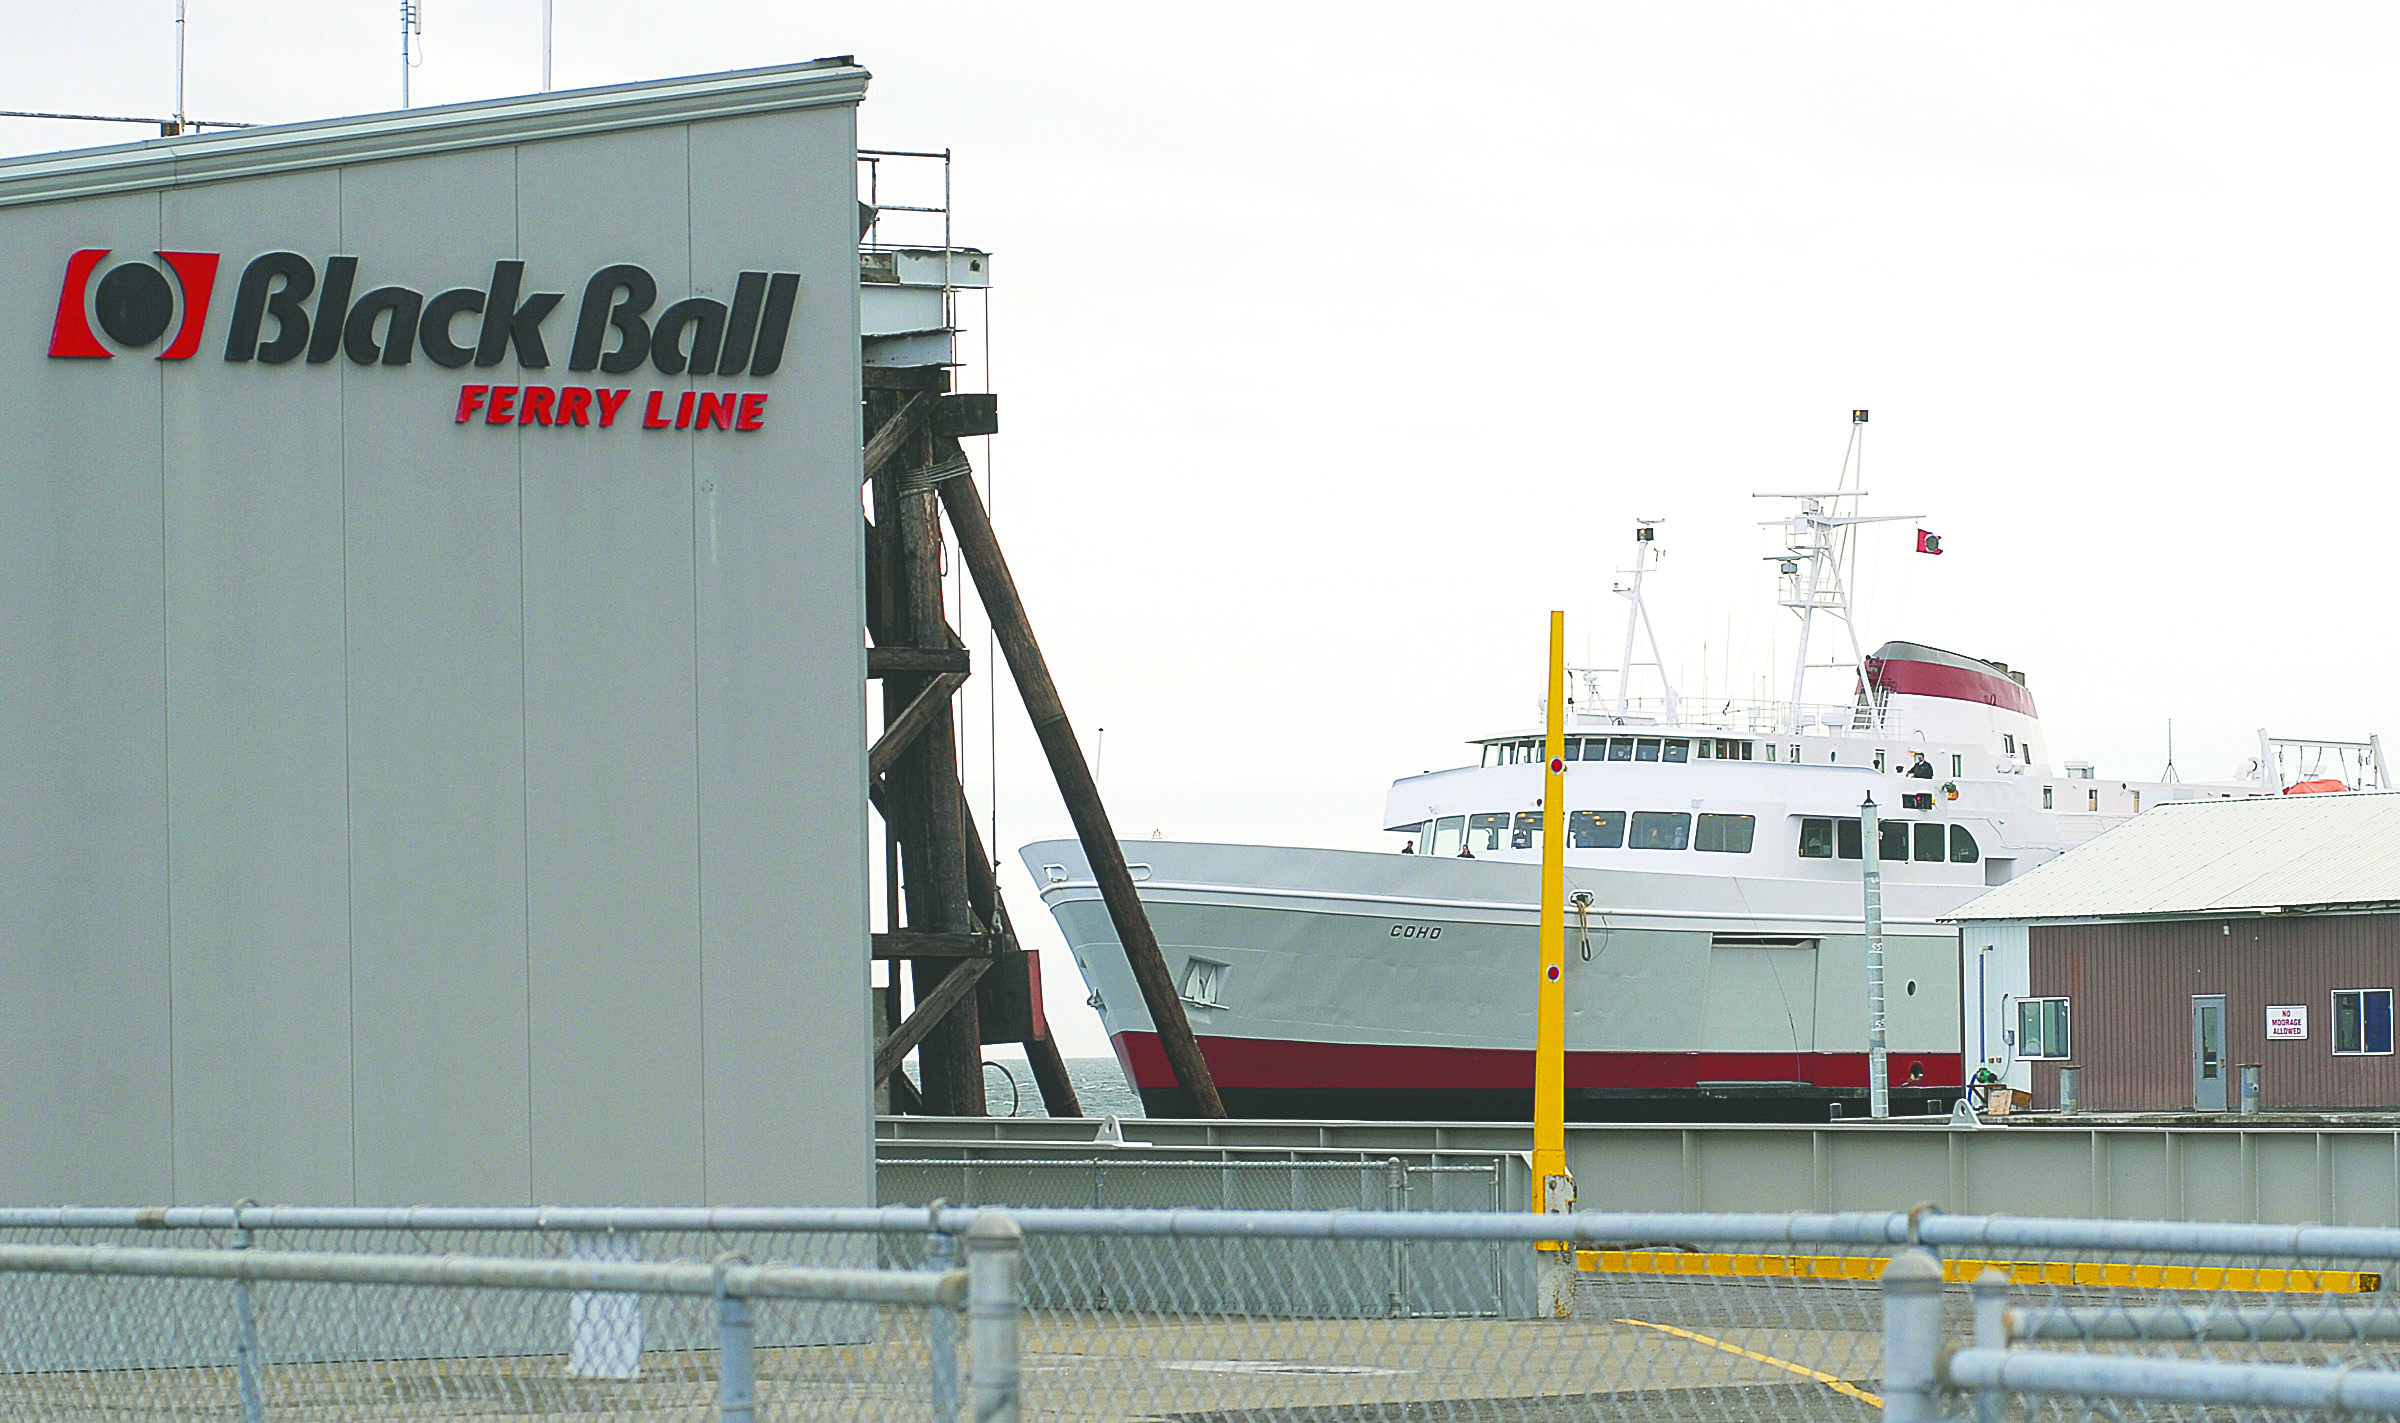 The MV Coho ferry pulls into Port Angeles on Monday. Black Ball Ferry Line will begin a multimillion-dollar renovation this fall of the terminal where the ferry docks. Chris Tucker/Peninsula Daily News